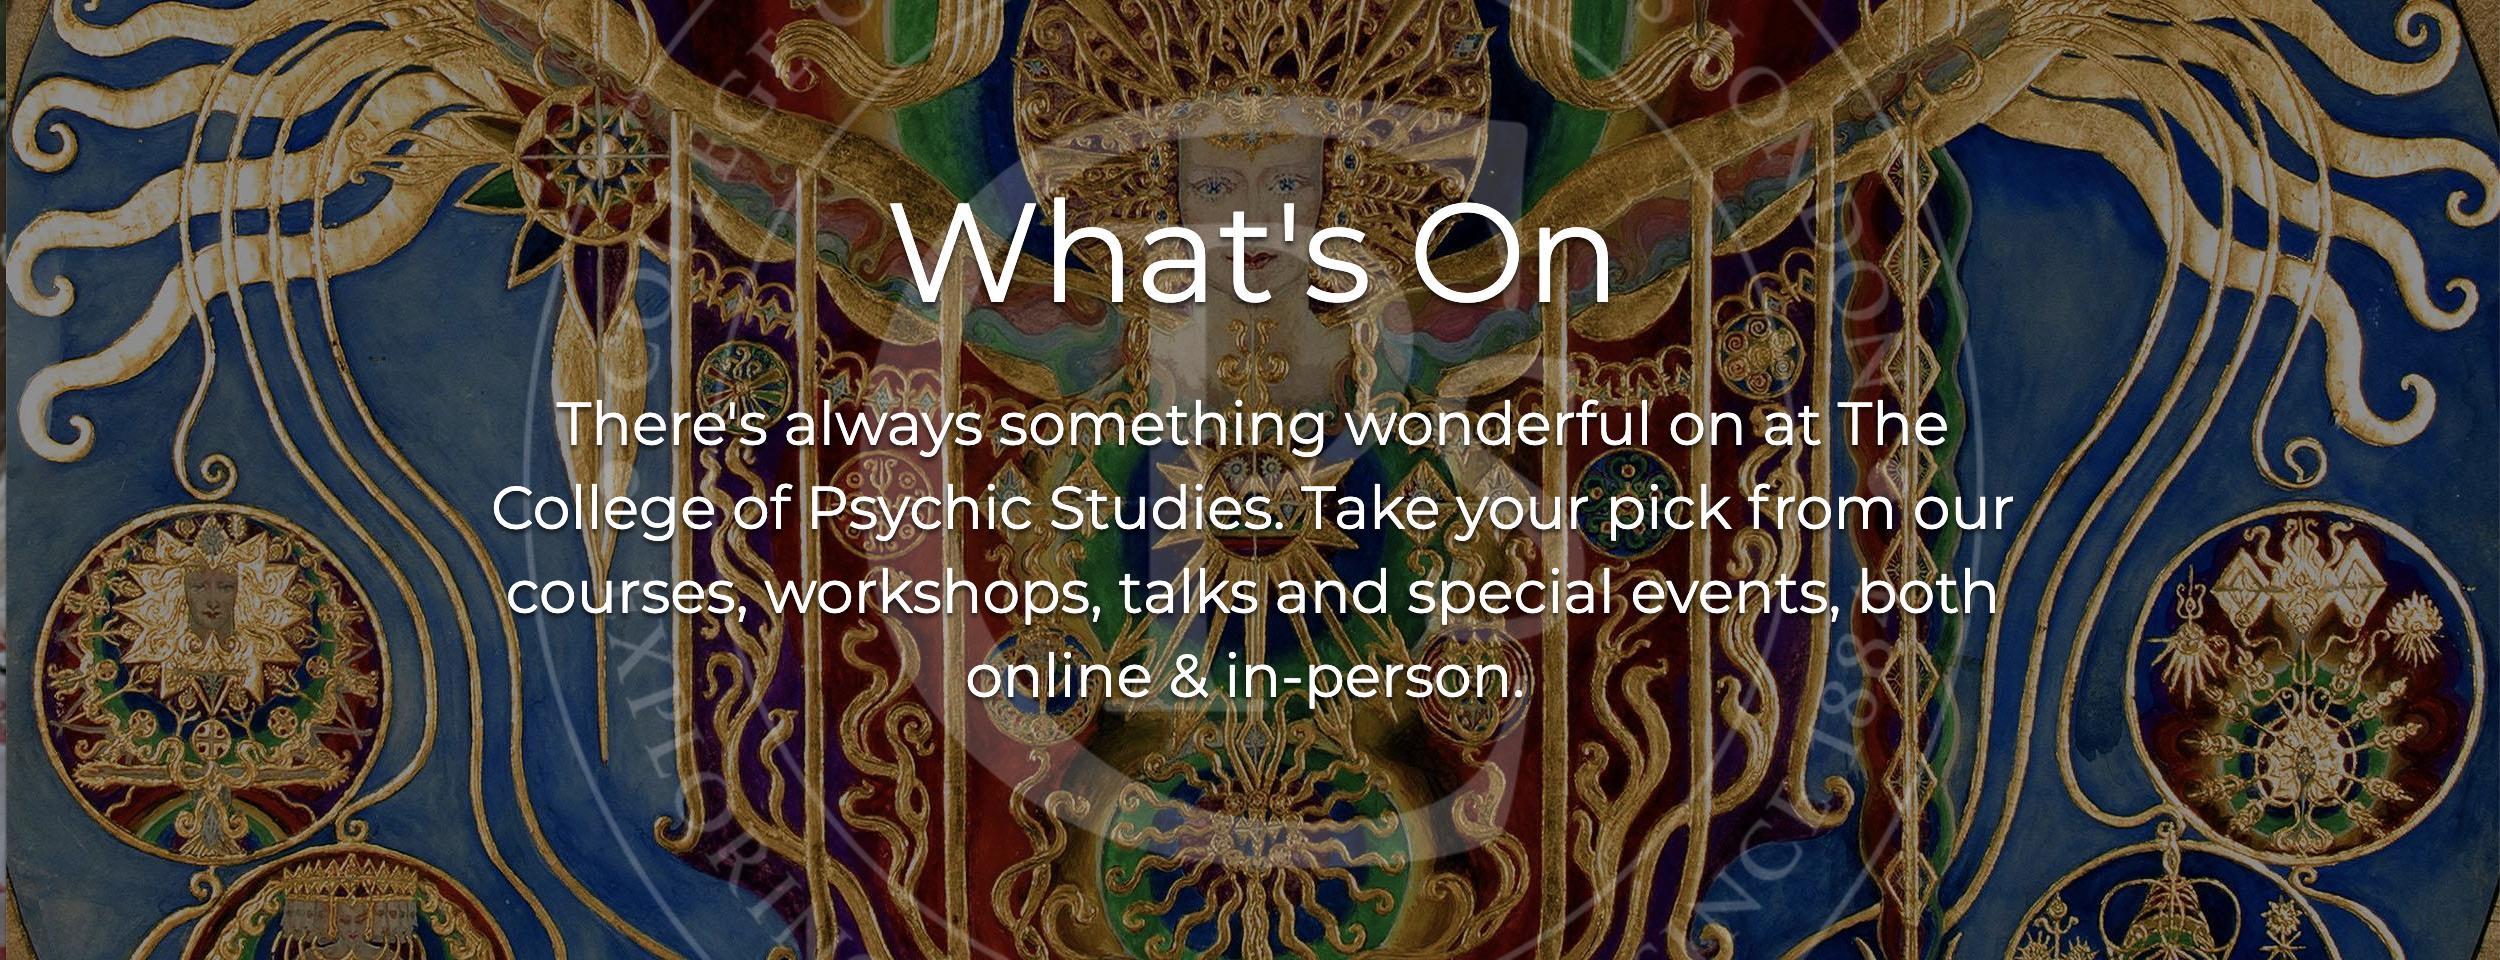 Link to What's On at The College of Psychic Studies